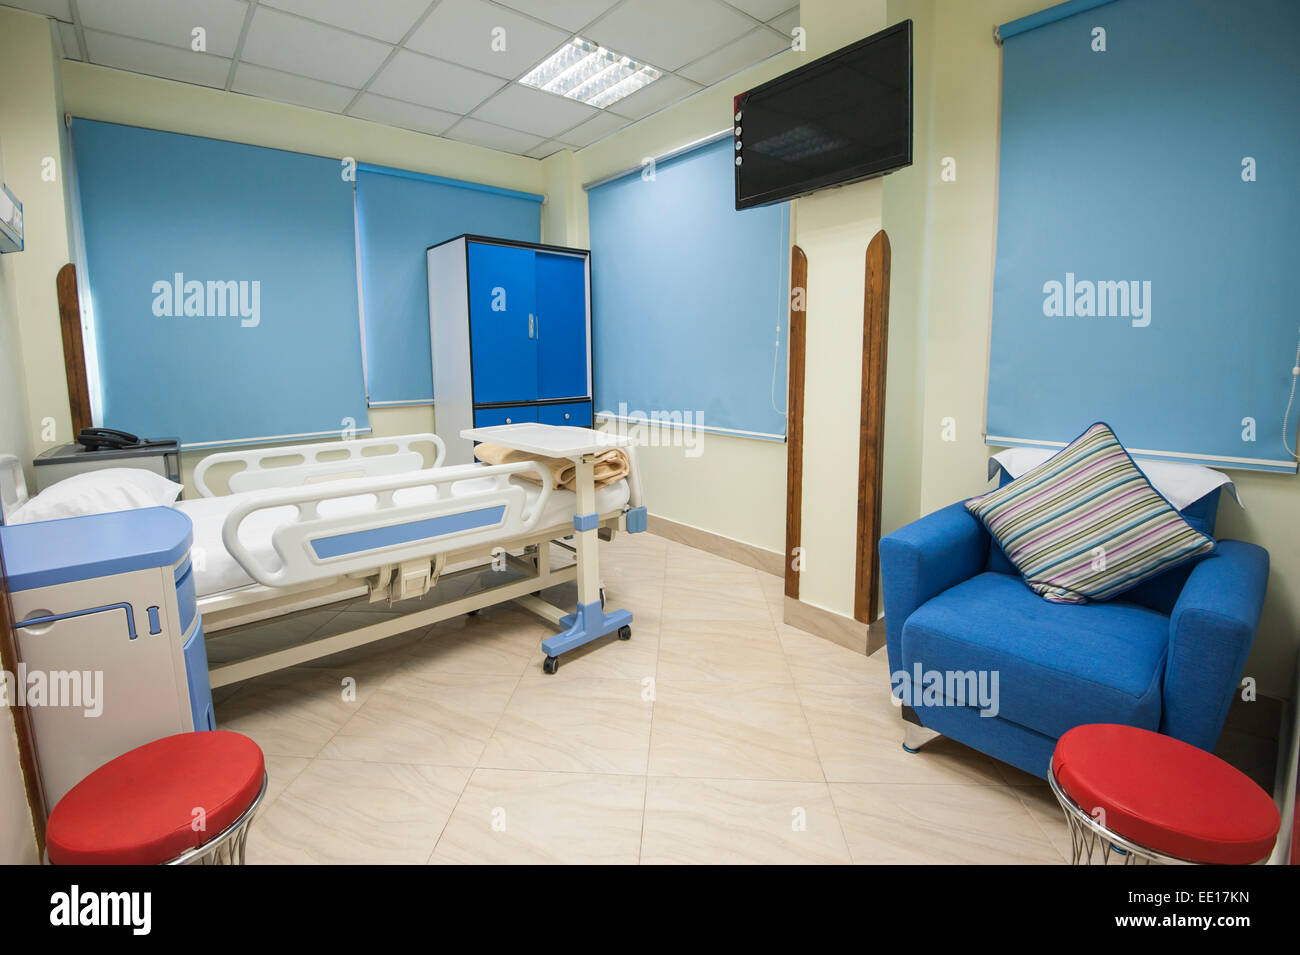 Bed in a private hospital medical center ward room Stock Photo